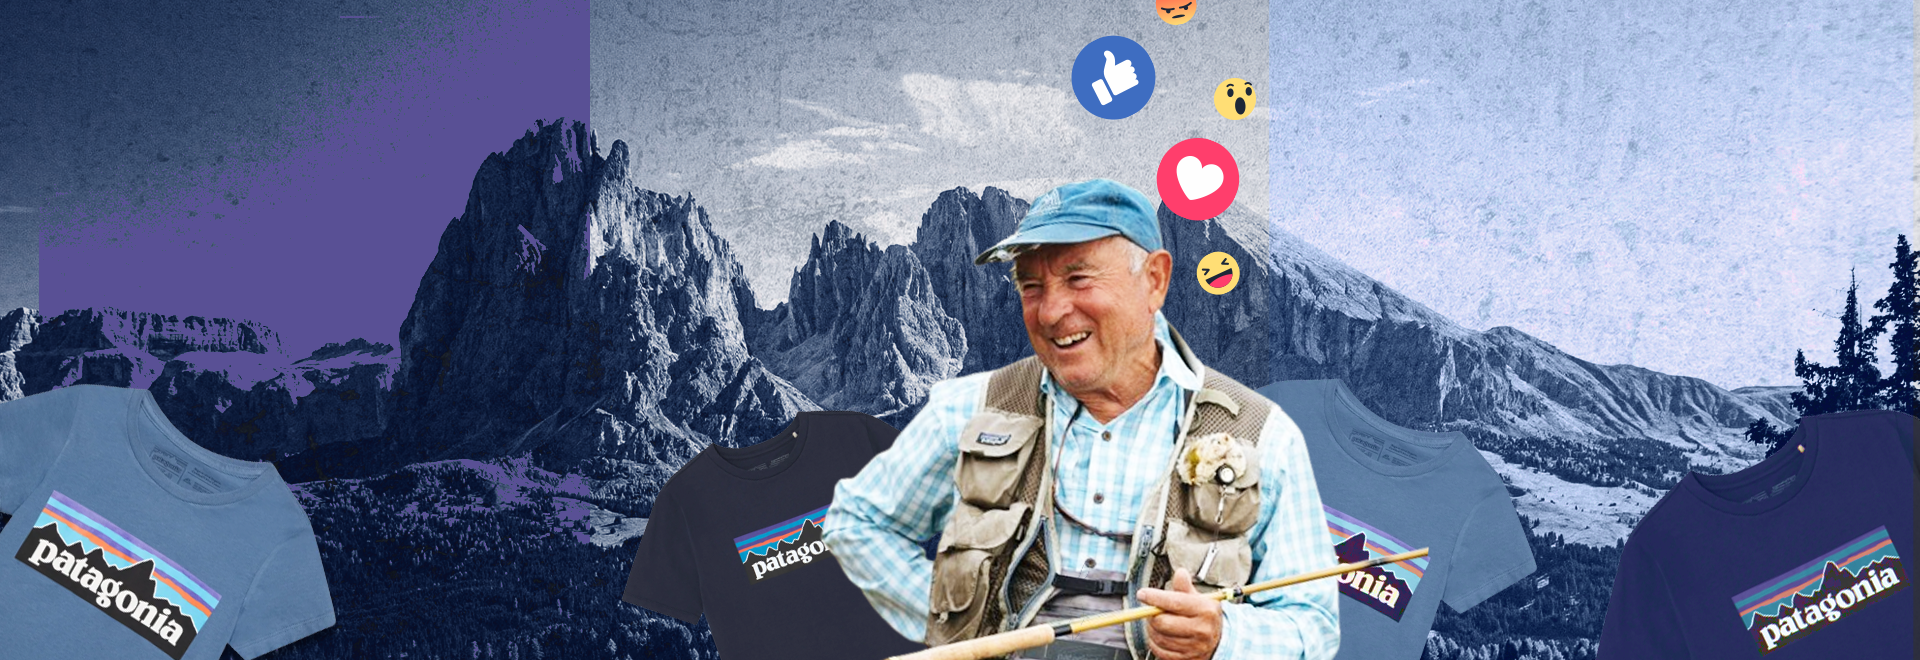 Patagonia founder gives away company — and racks up huge social media numbers as a result